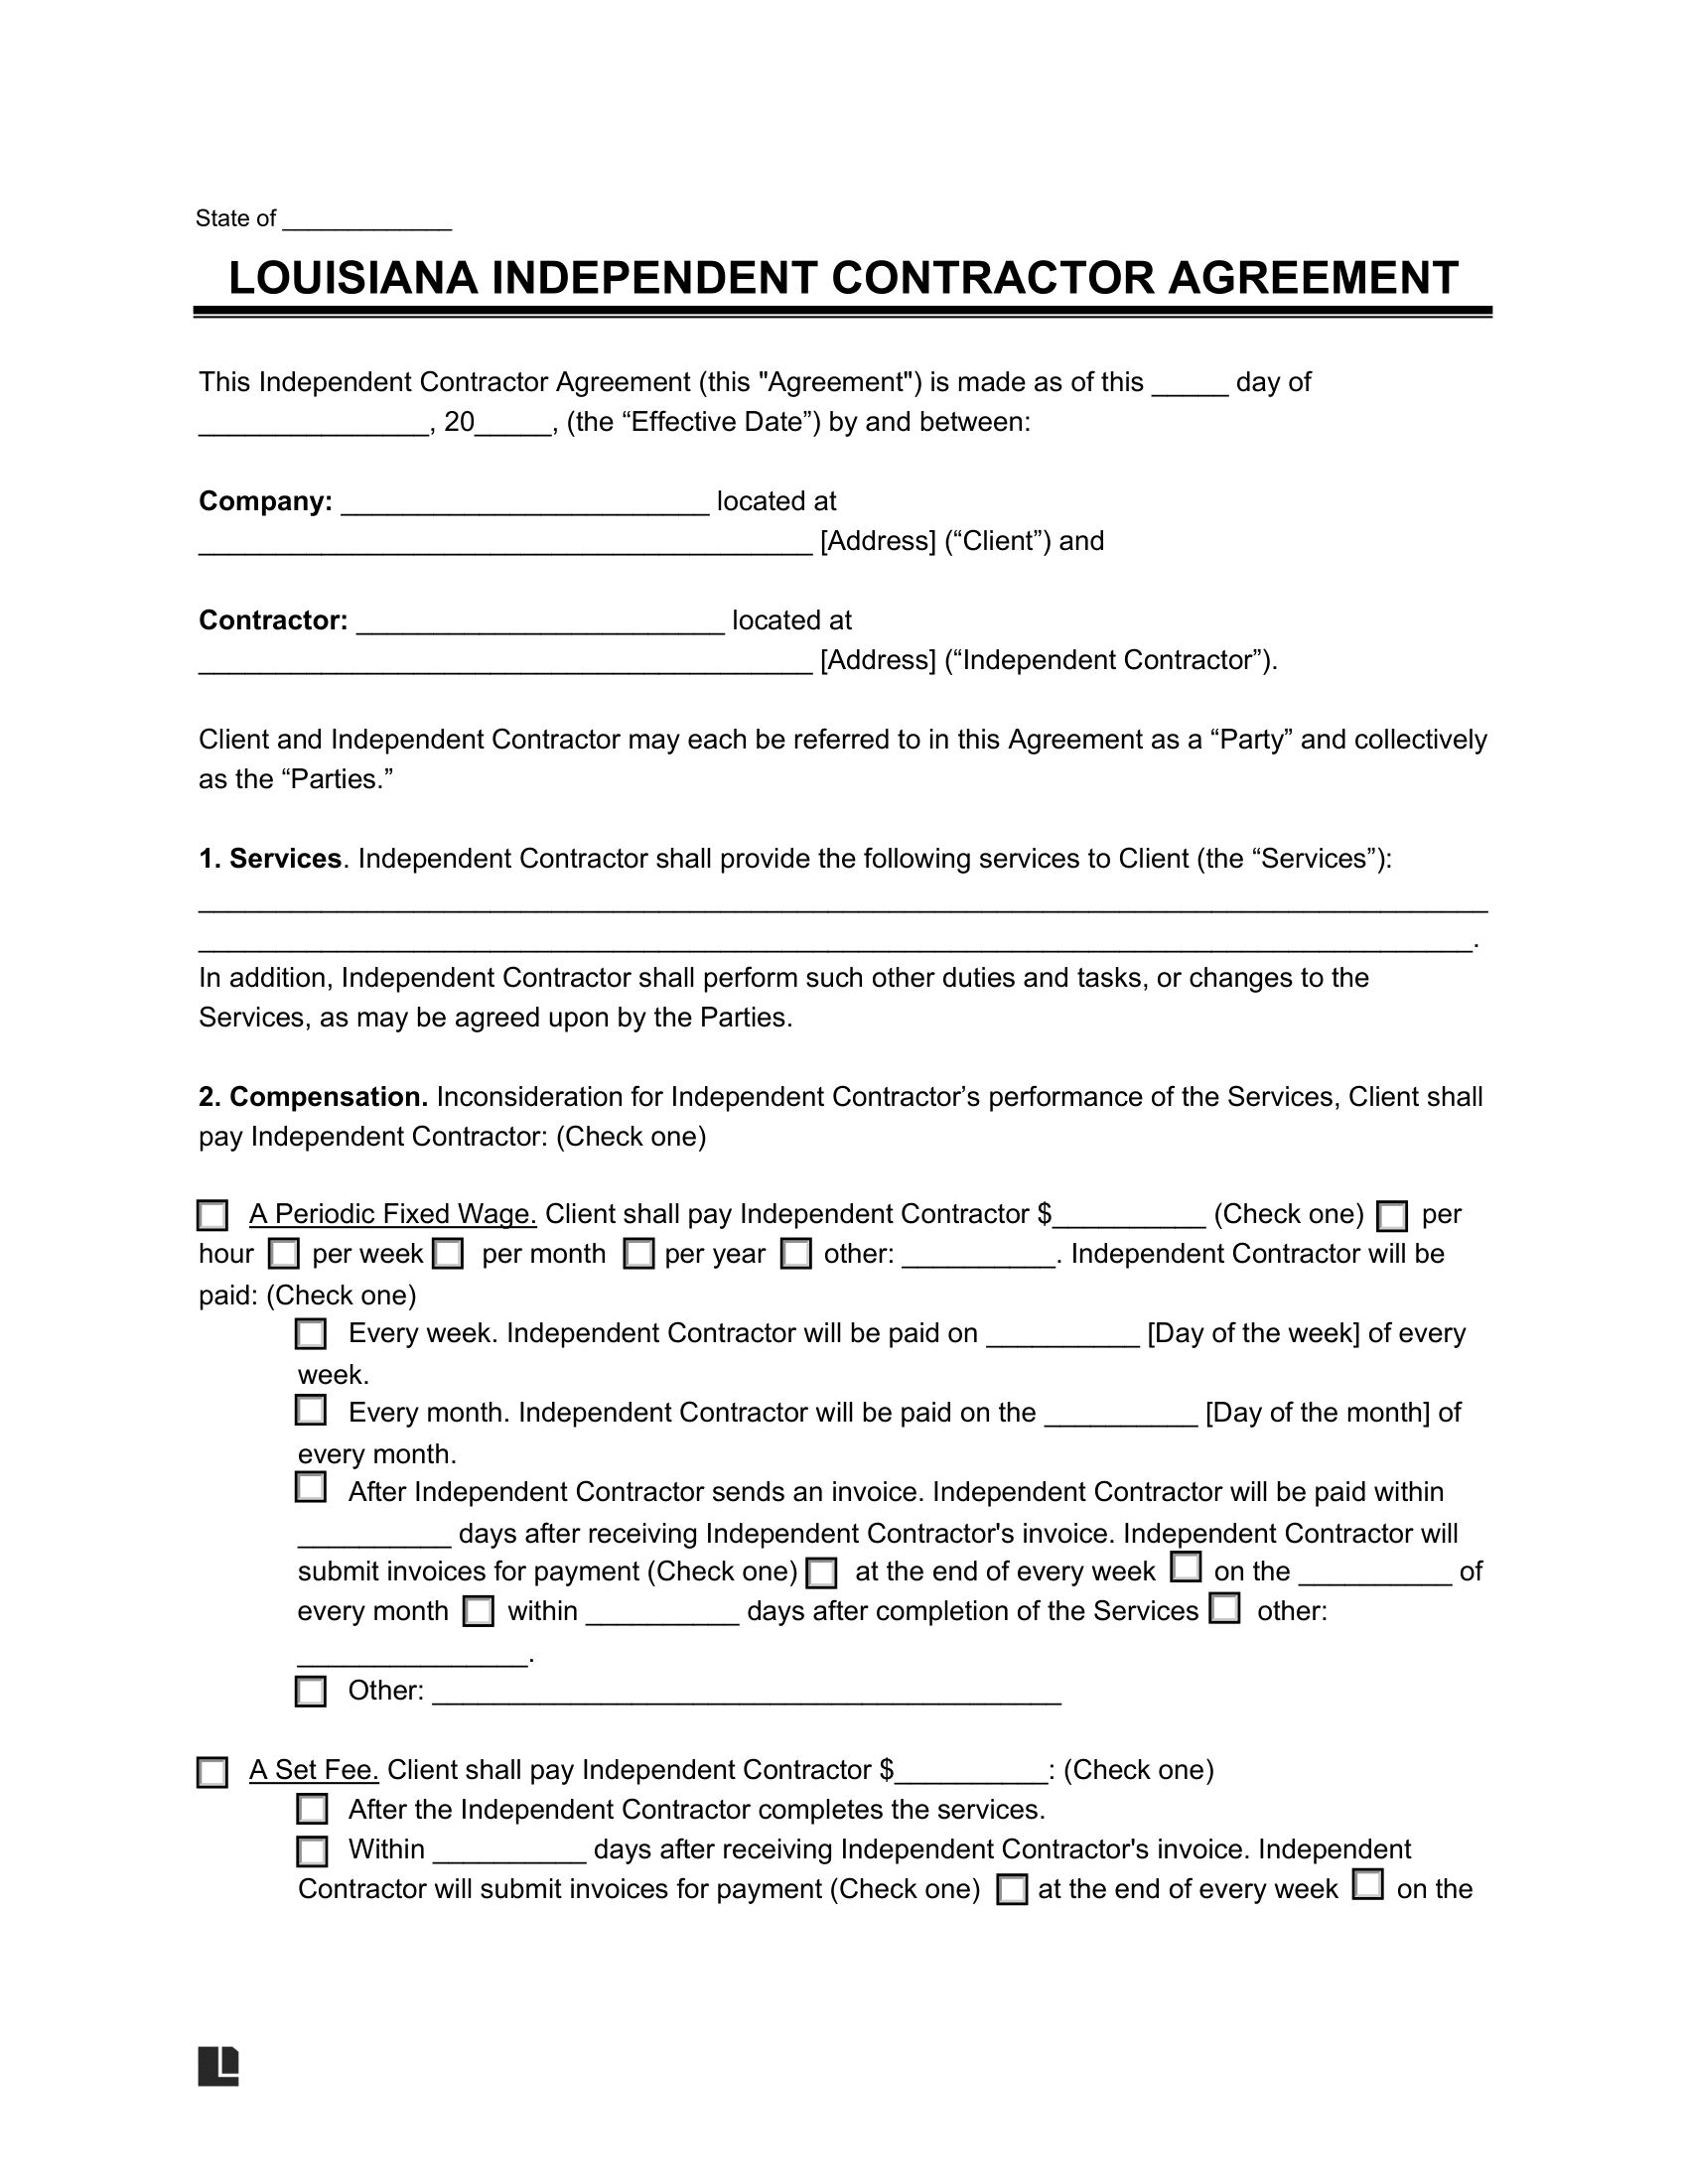 Louisiana Independent Contractor Agreement